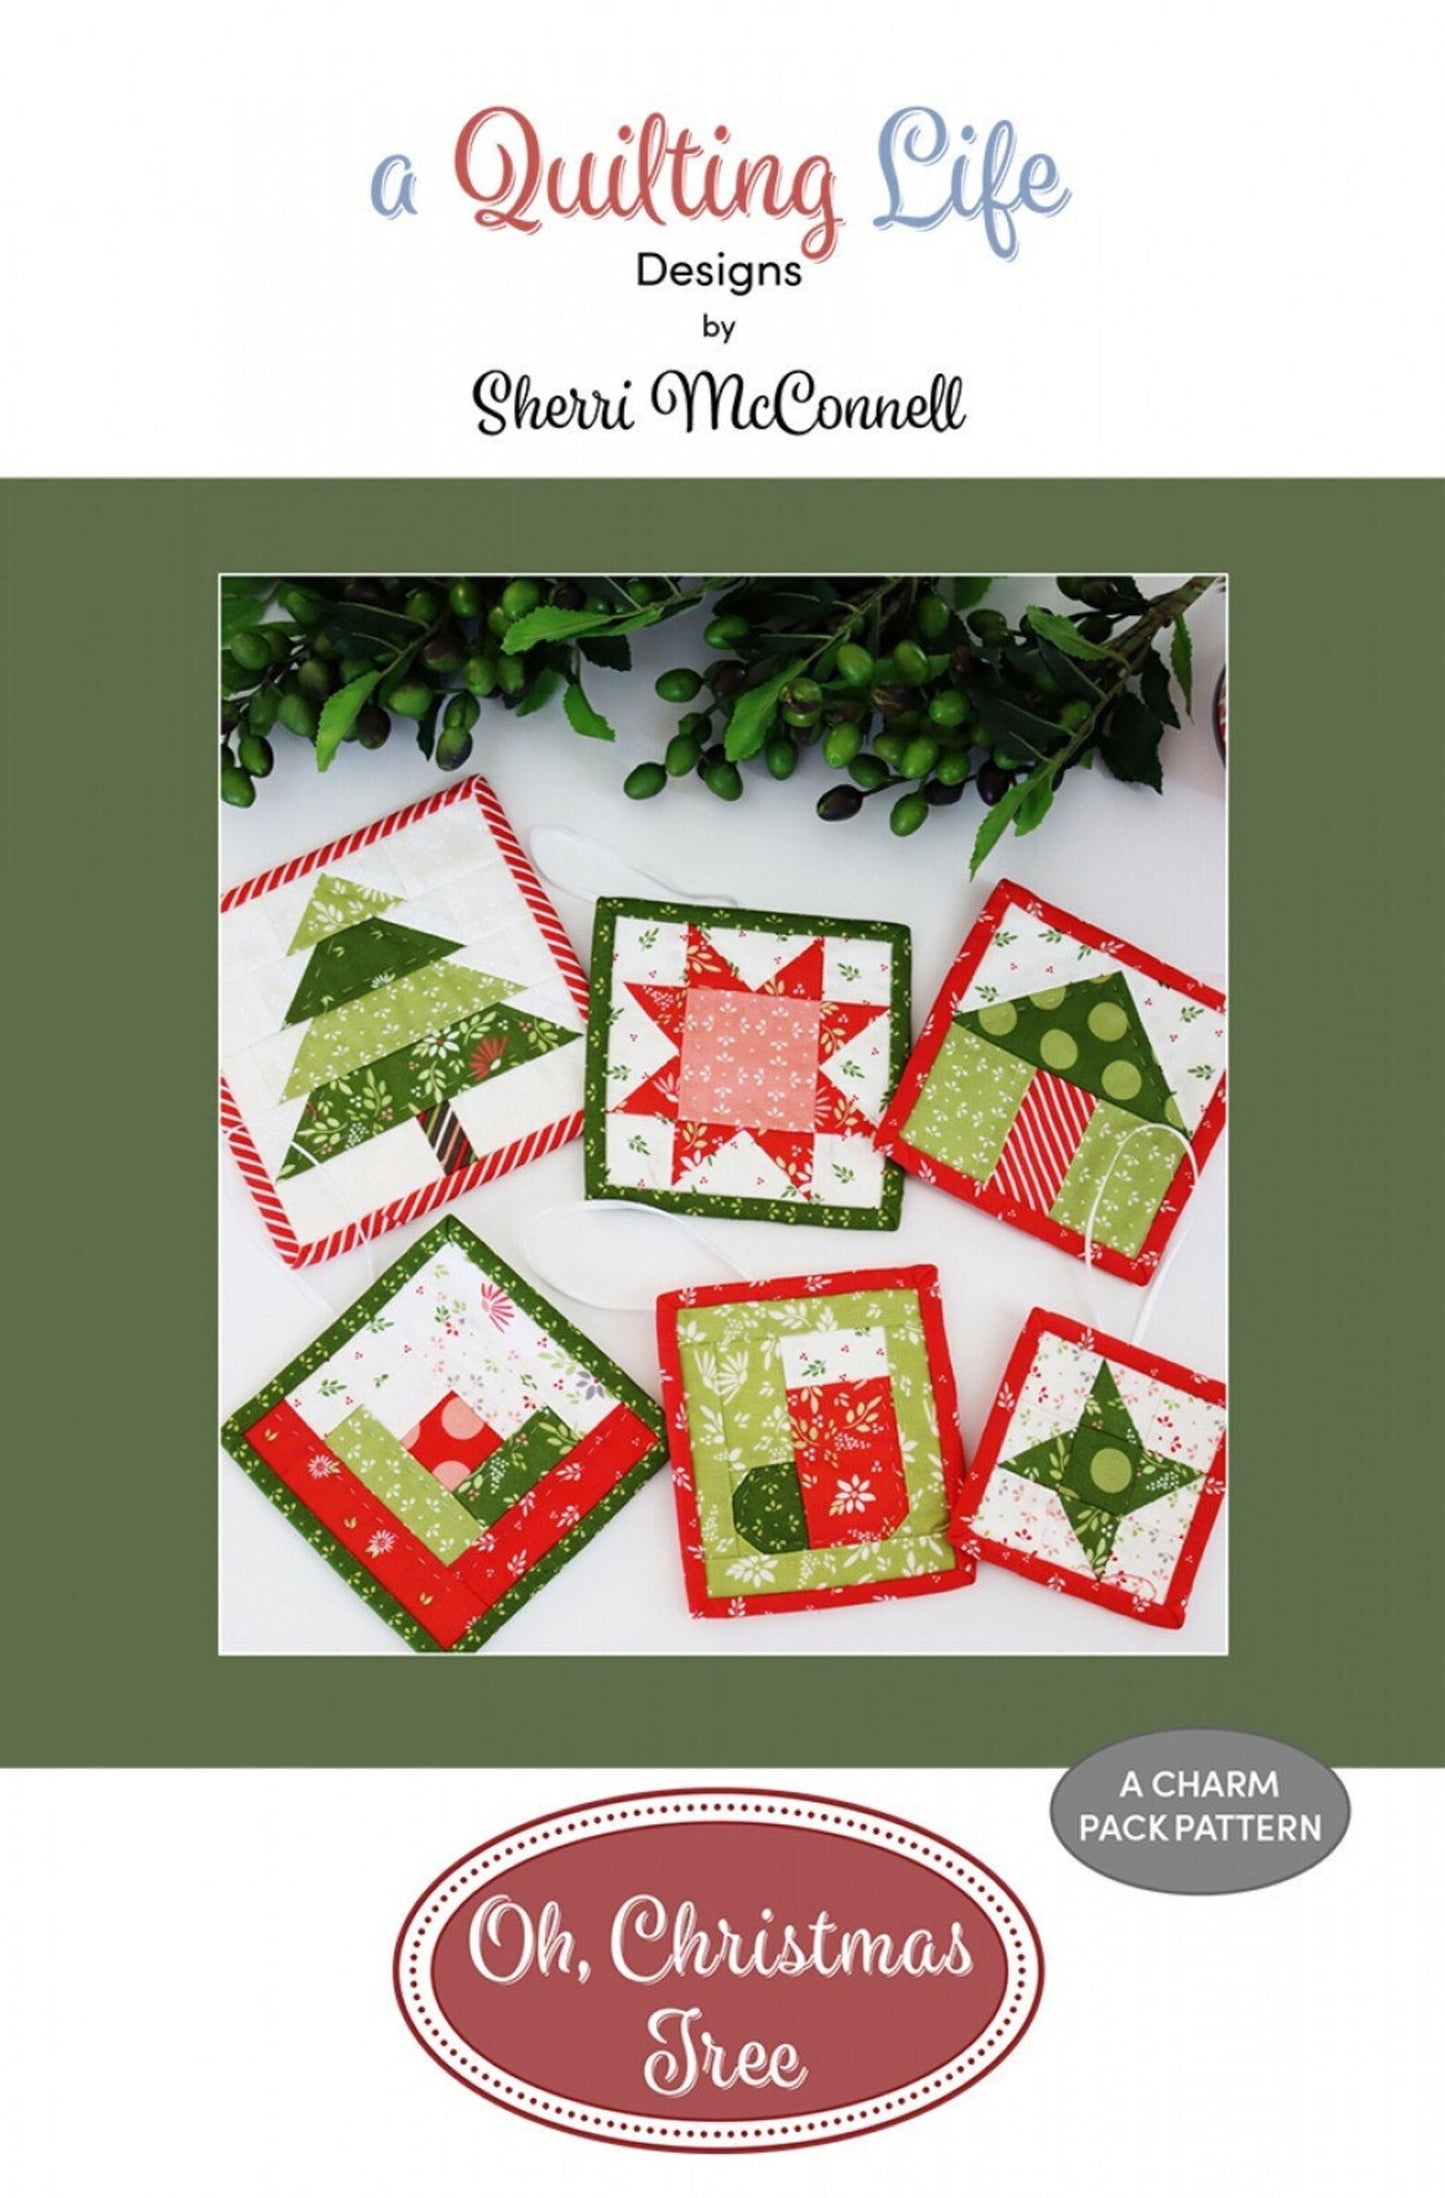 Oh, Christmas Tree - A Quilting Life Designs by Sherri McConnell